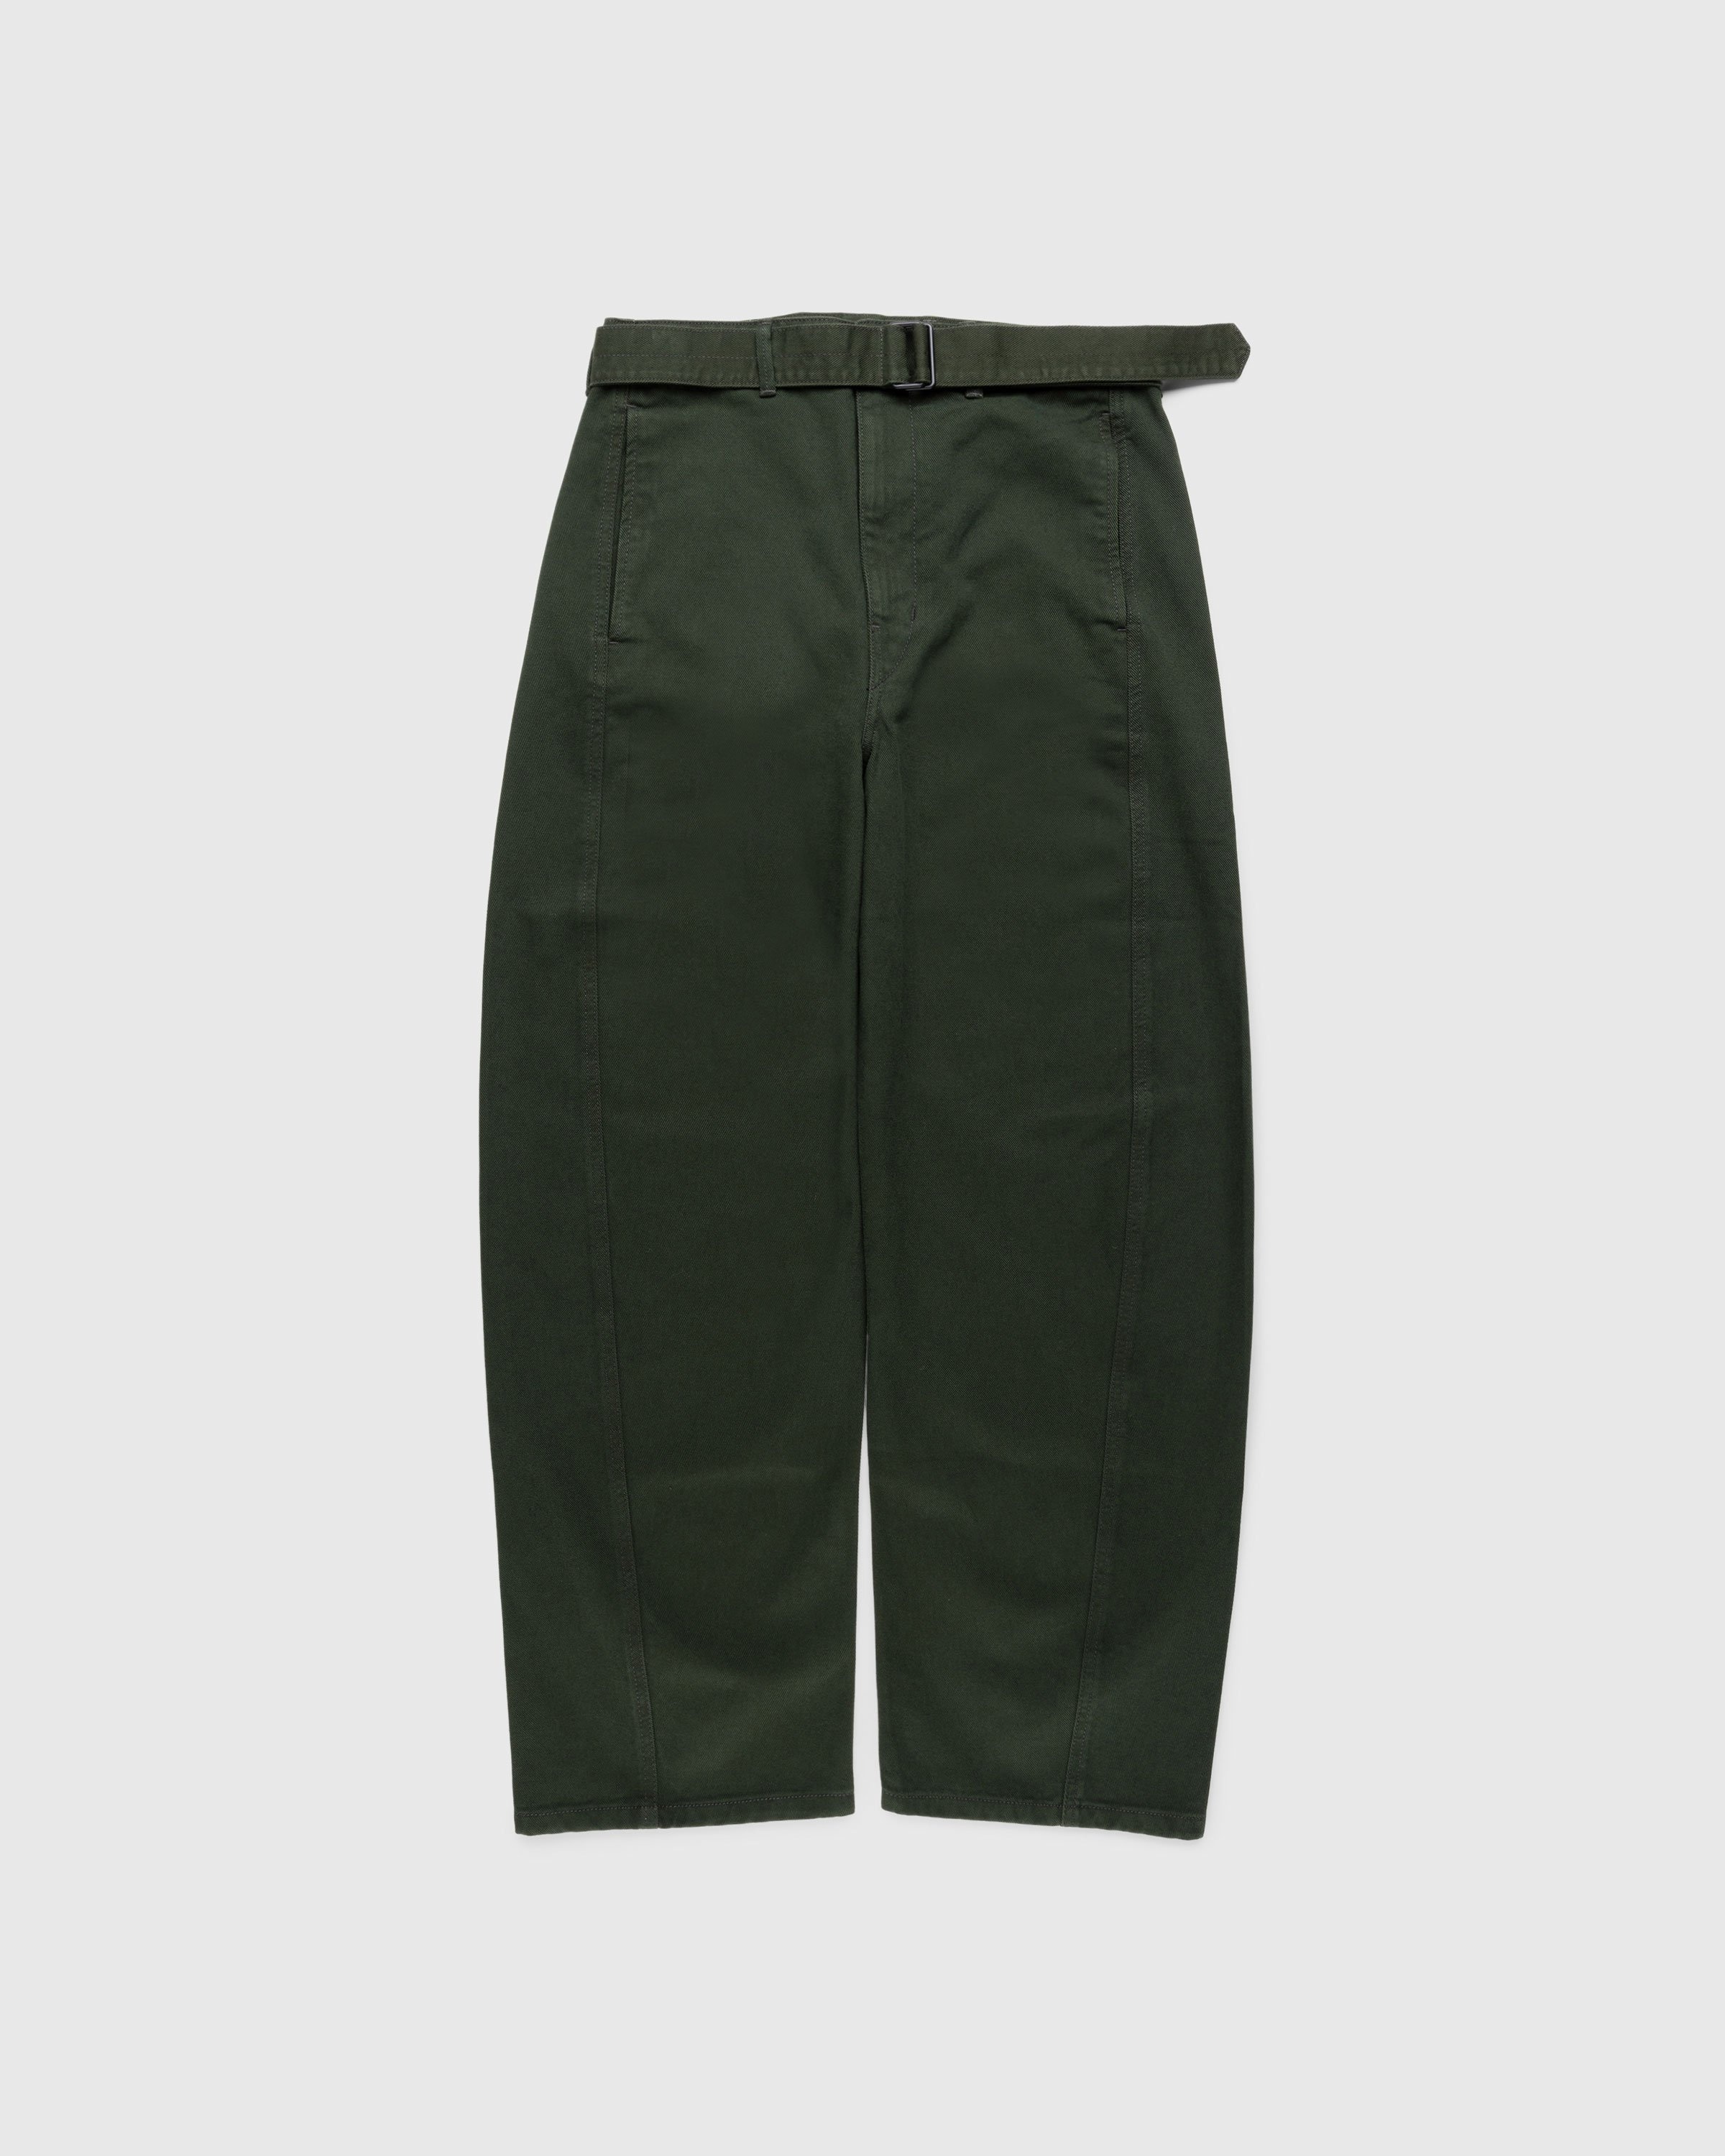 Lemaire – Twisted Belted Pants Green | Highsnobiety Shop